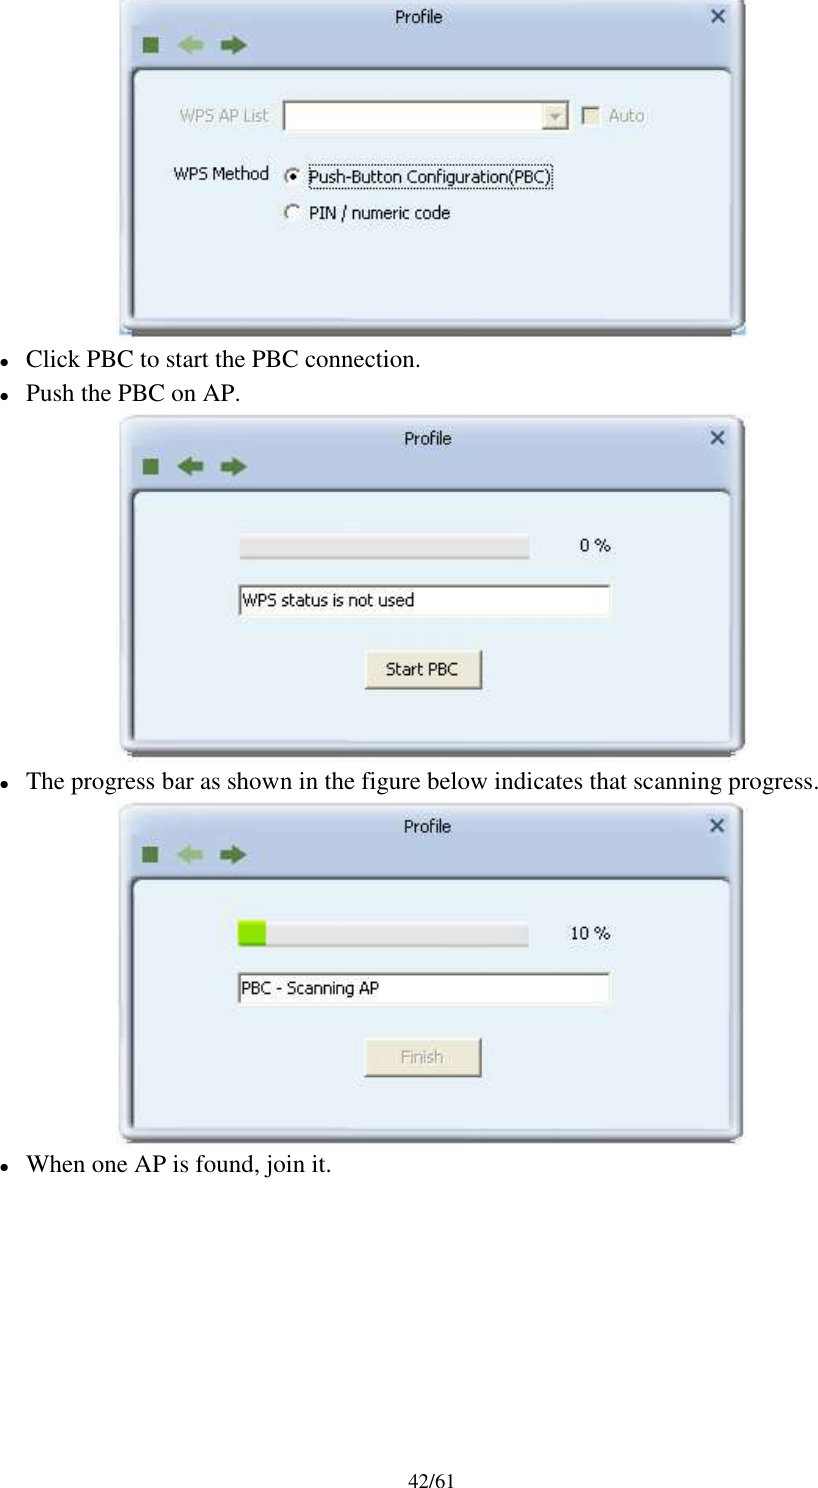 42/61Click PBC to start the PBC connection.Push the PBC on AP.The progress bar as shown in the figure below indicates that scanning progress.When one AP is found, join it.